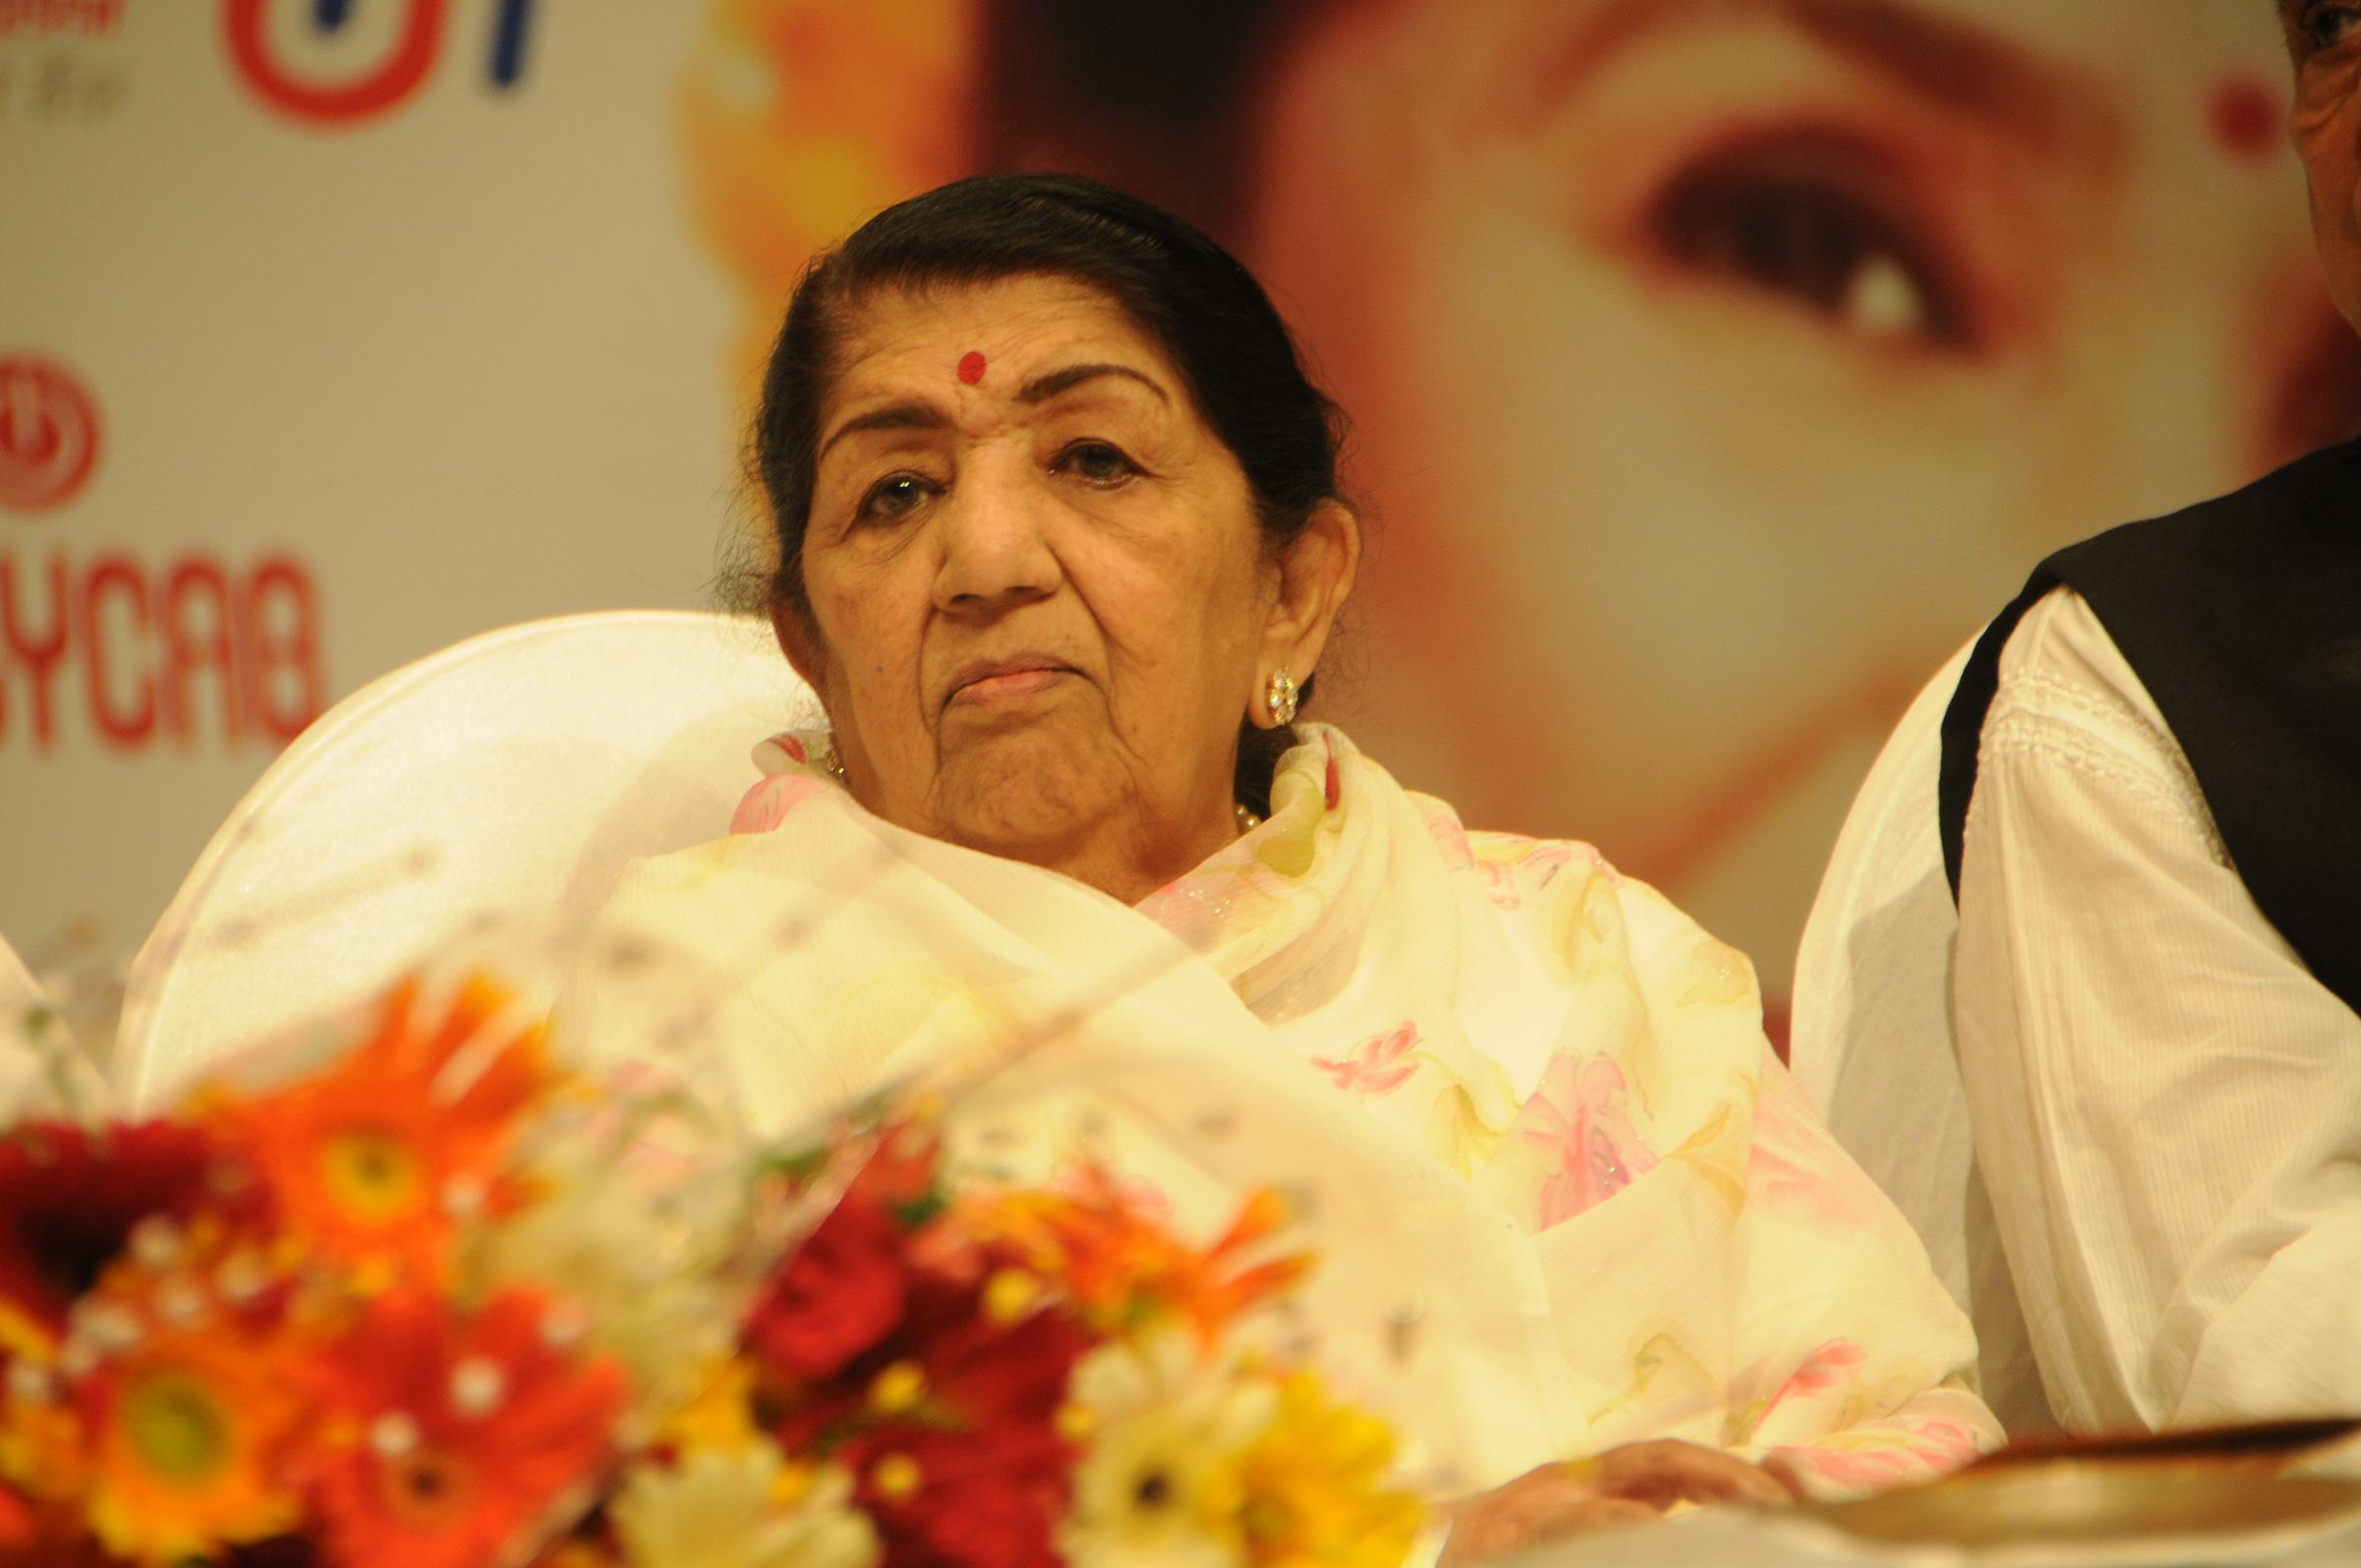 Lata Mangeshkar Reveals The One Thing About Tanmay Bhat Video That Really Upset Her